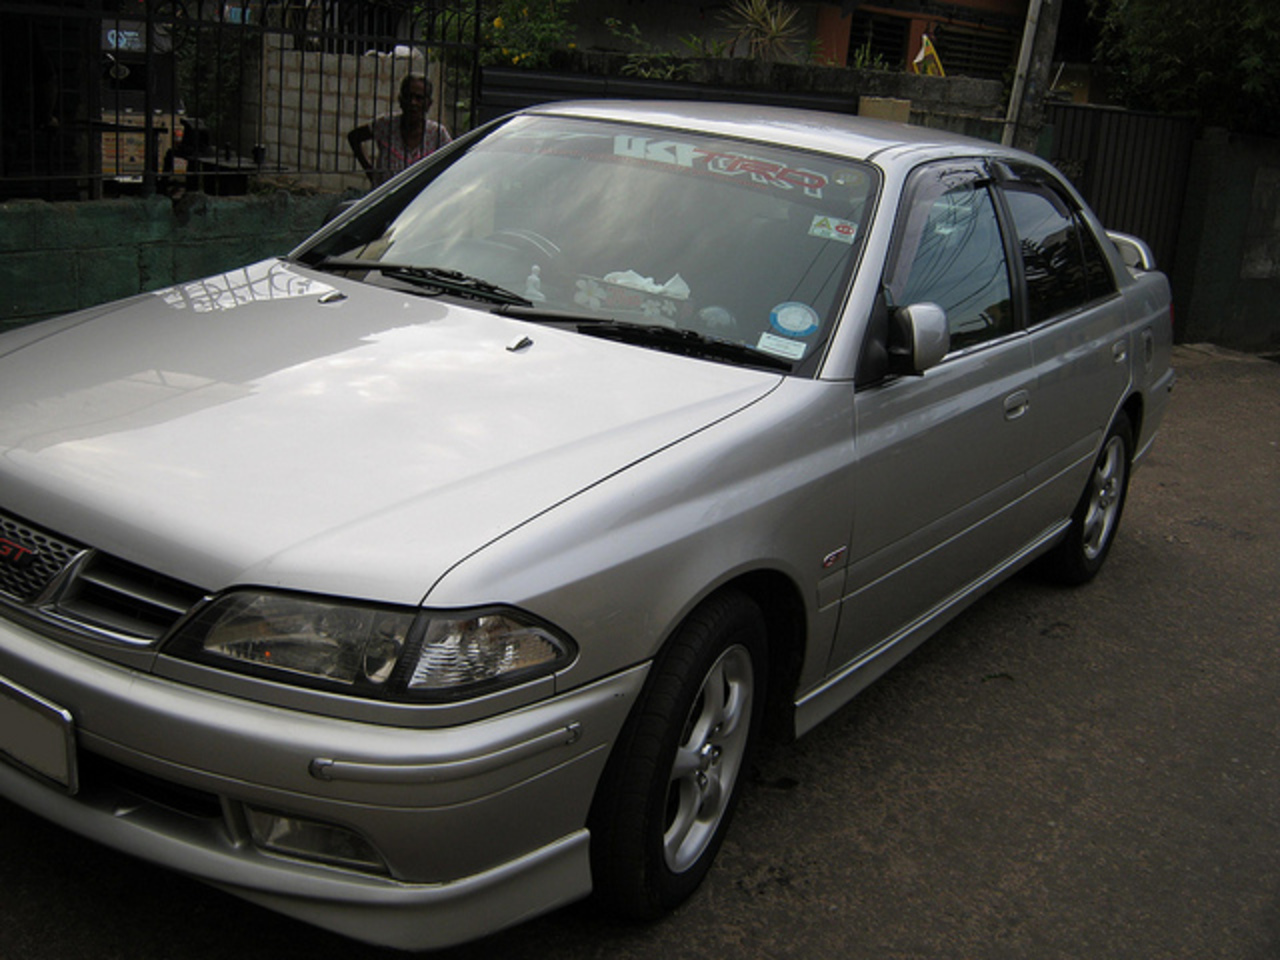 Toyota Carina GT Sport High Quality | Flickr - Photo Sharing!